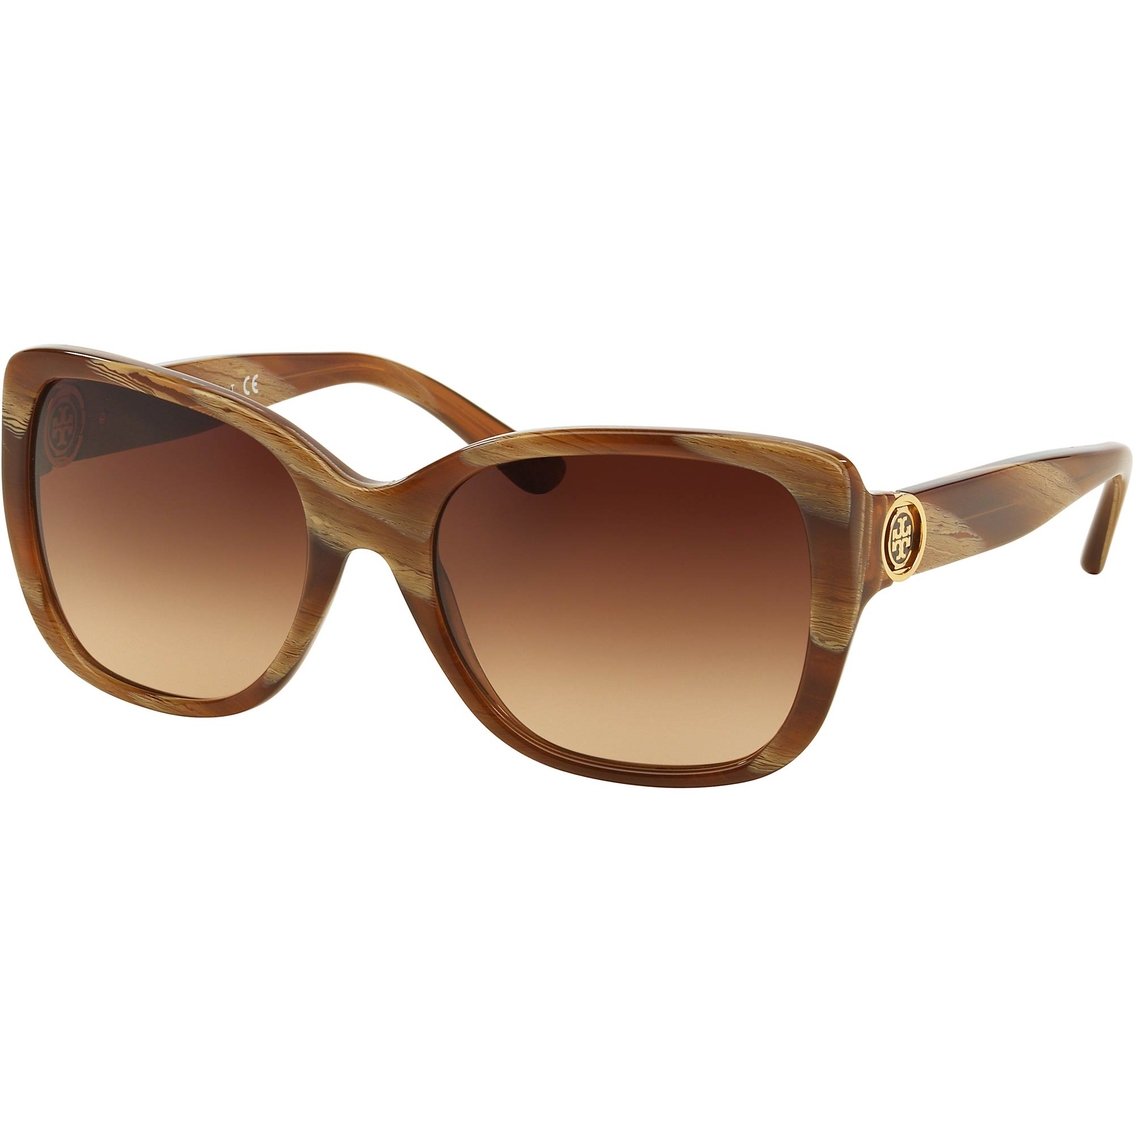 Tory Burch Sunglasses 0ty7086 | Atg Archive | Shop The Exchange